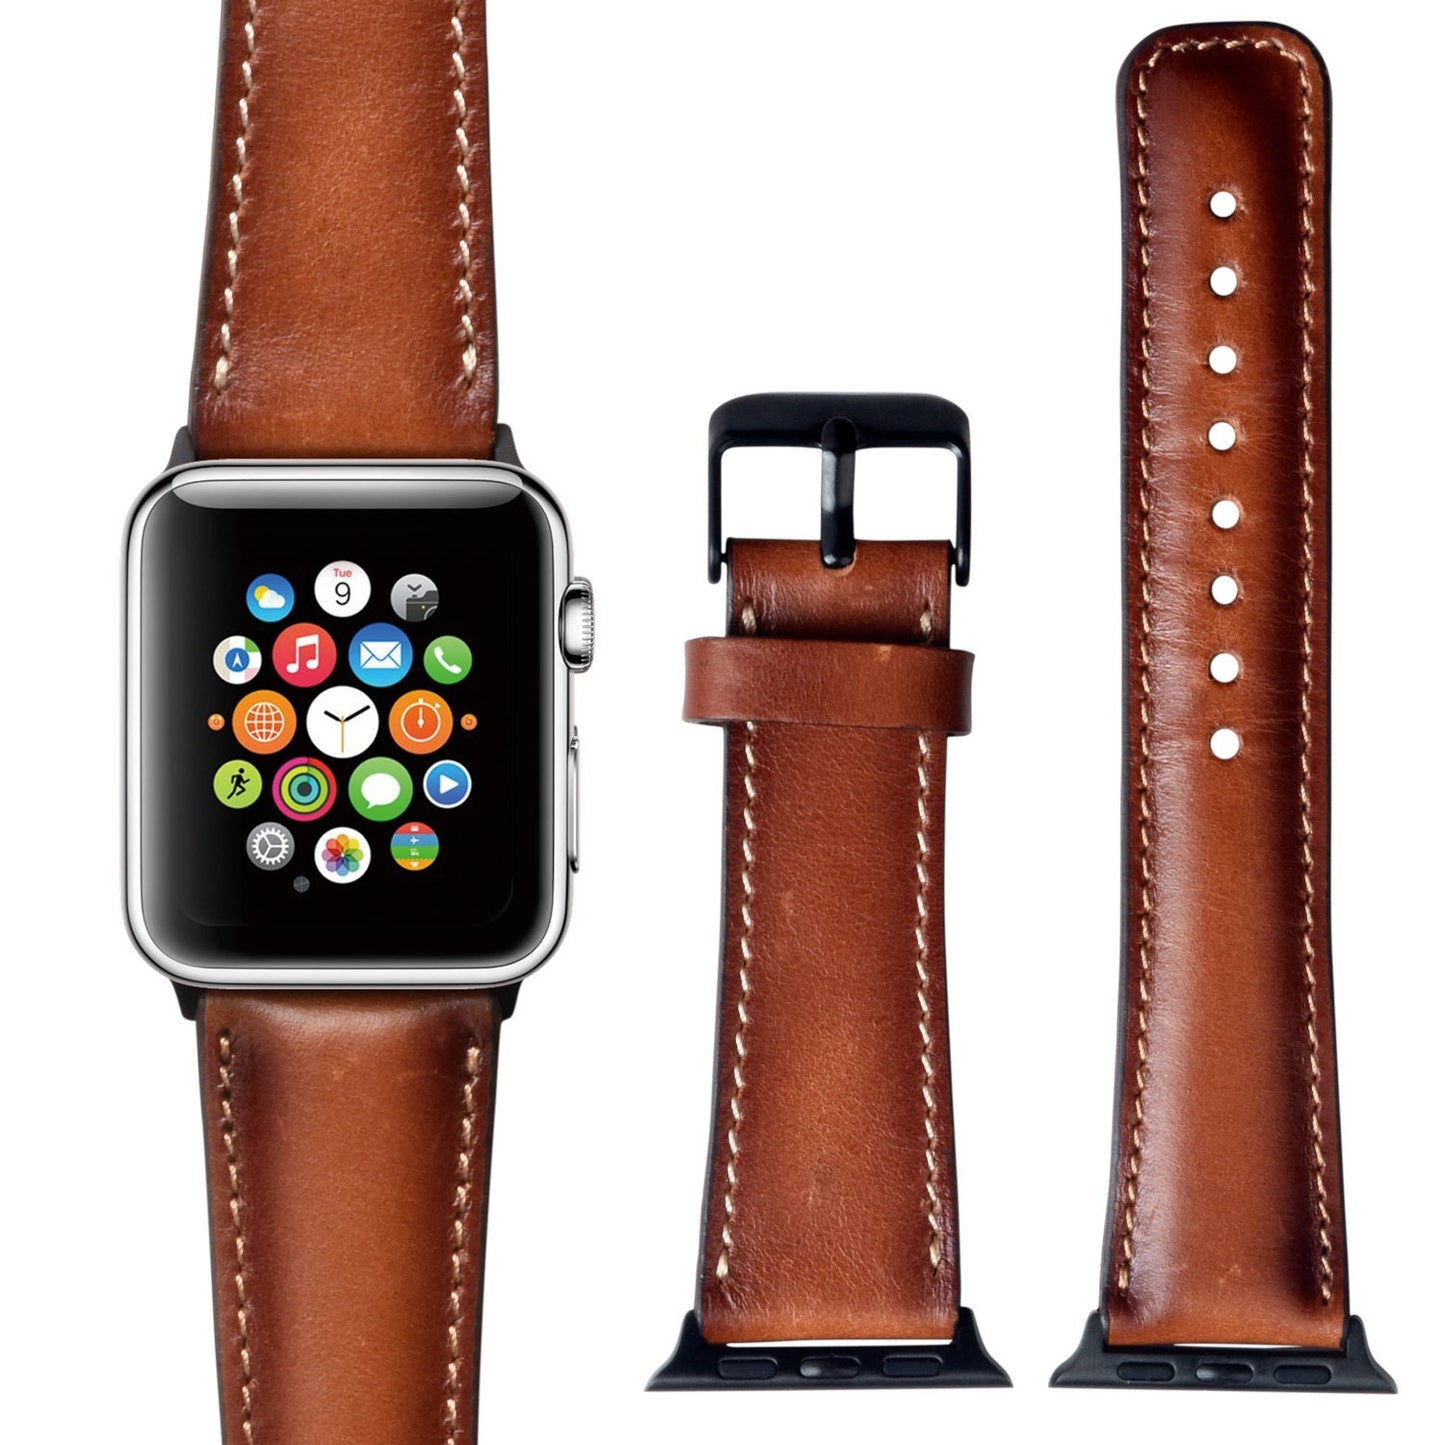 Apple Watch Band, Apple Watch Leather Band, Genuine Leather Brown Apple Watch Band 42mm, 38mm, 40mm, 44mm, Series 2-3-4-5-6-7